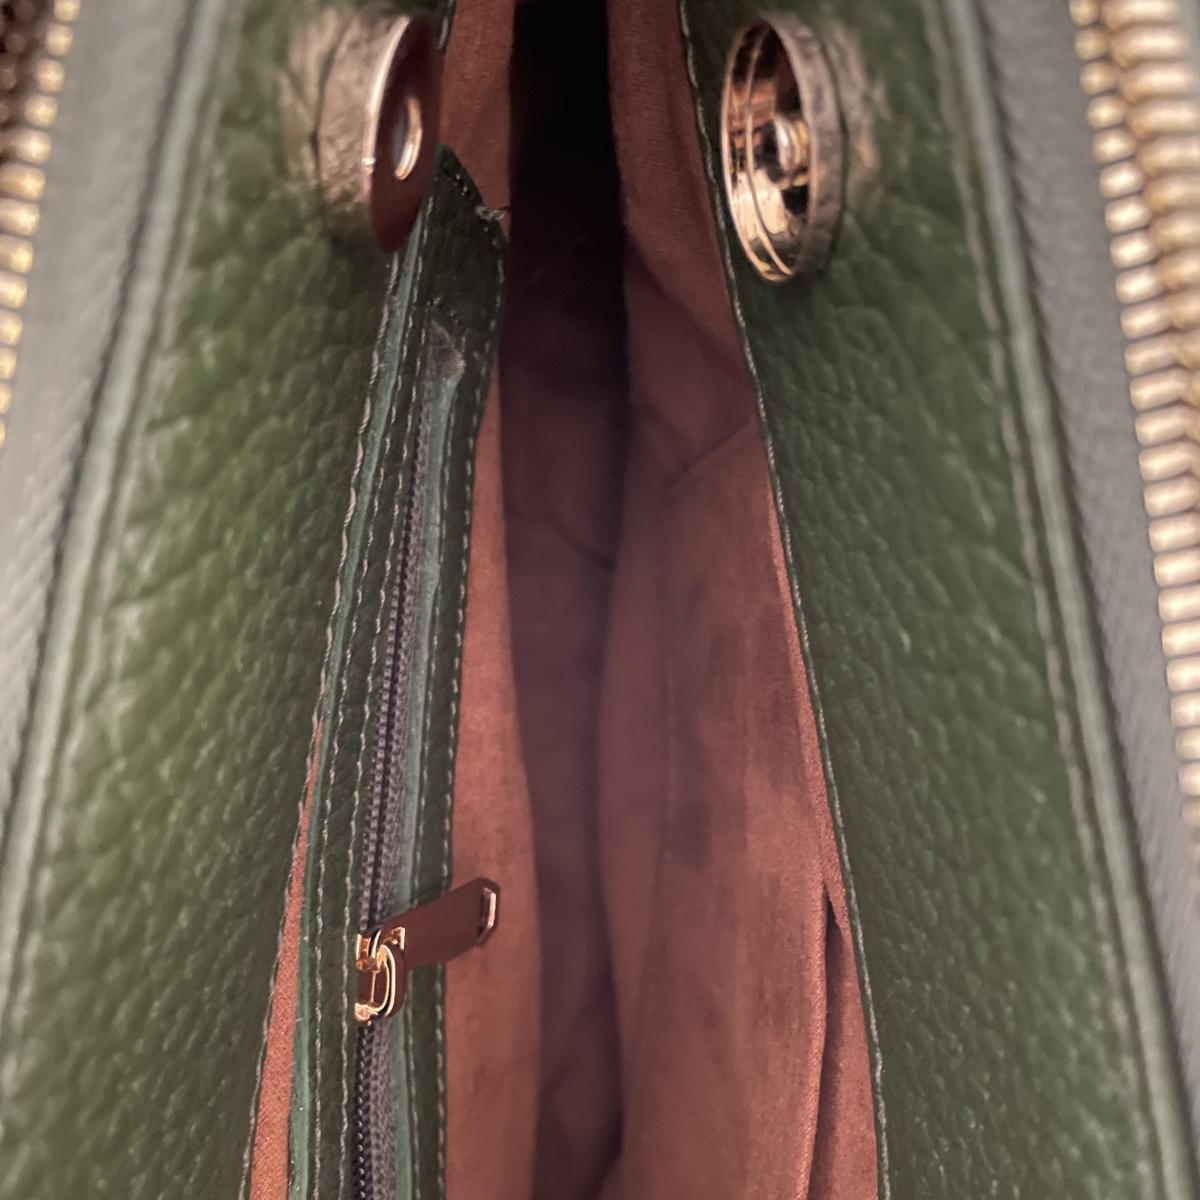 LeatherLuxe - Green Leather Office Bag: Functional Shoulder Bag Genuine leather Designer Premium leather bag for women leather hobo tote messenger bag Leather Accessories Leather Shop Leather Goods